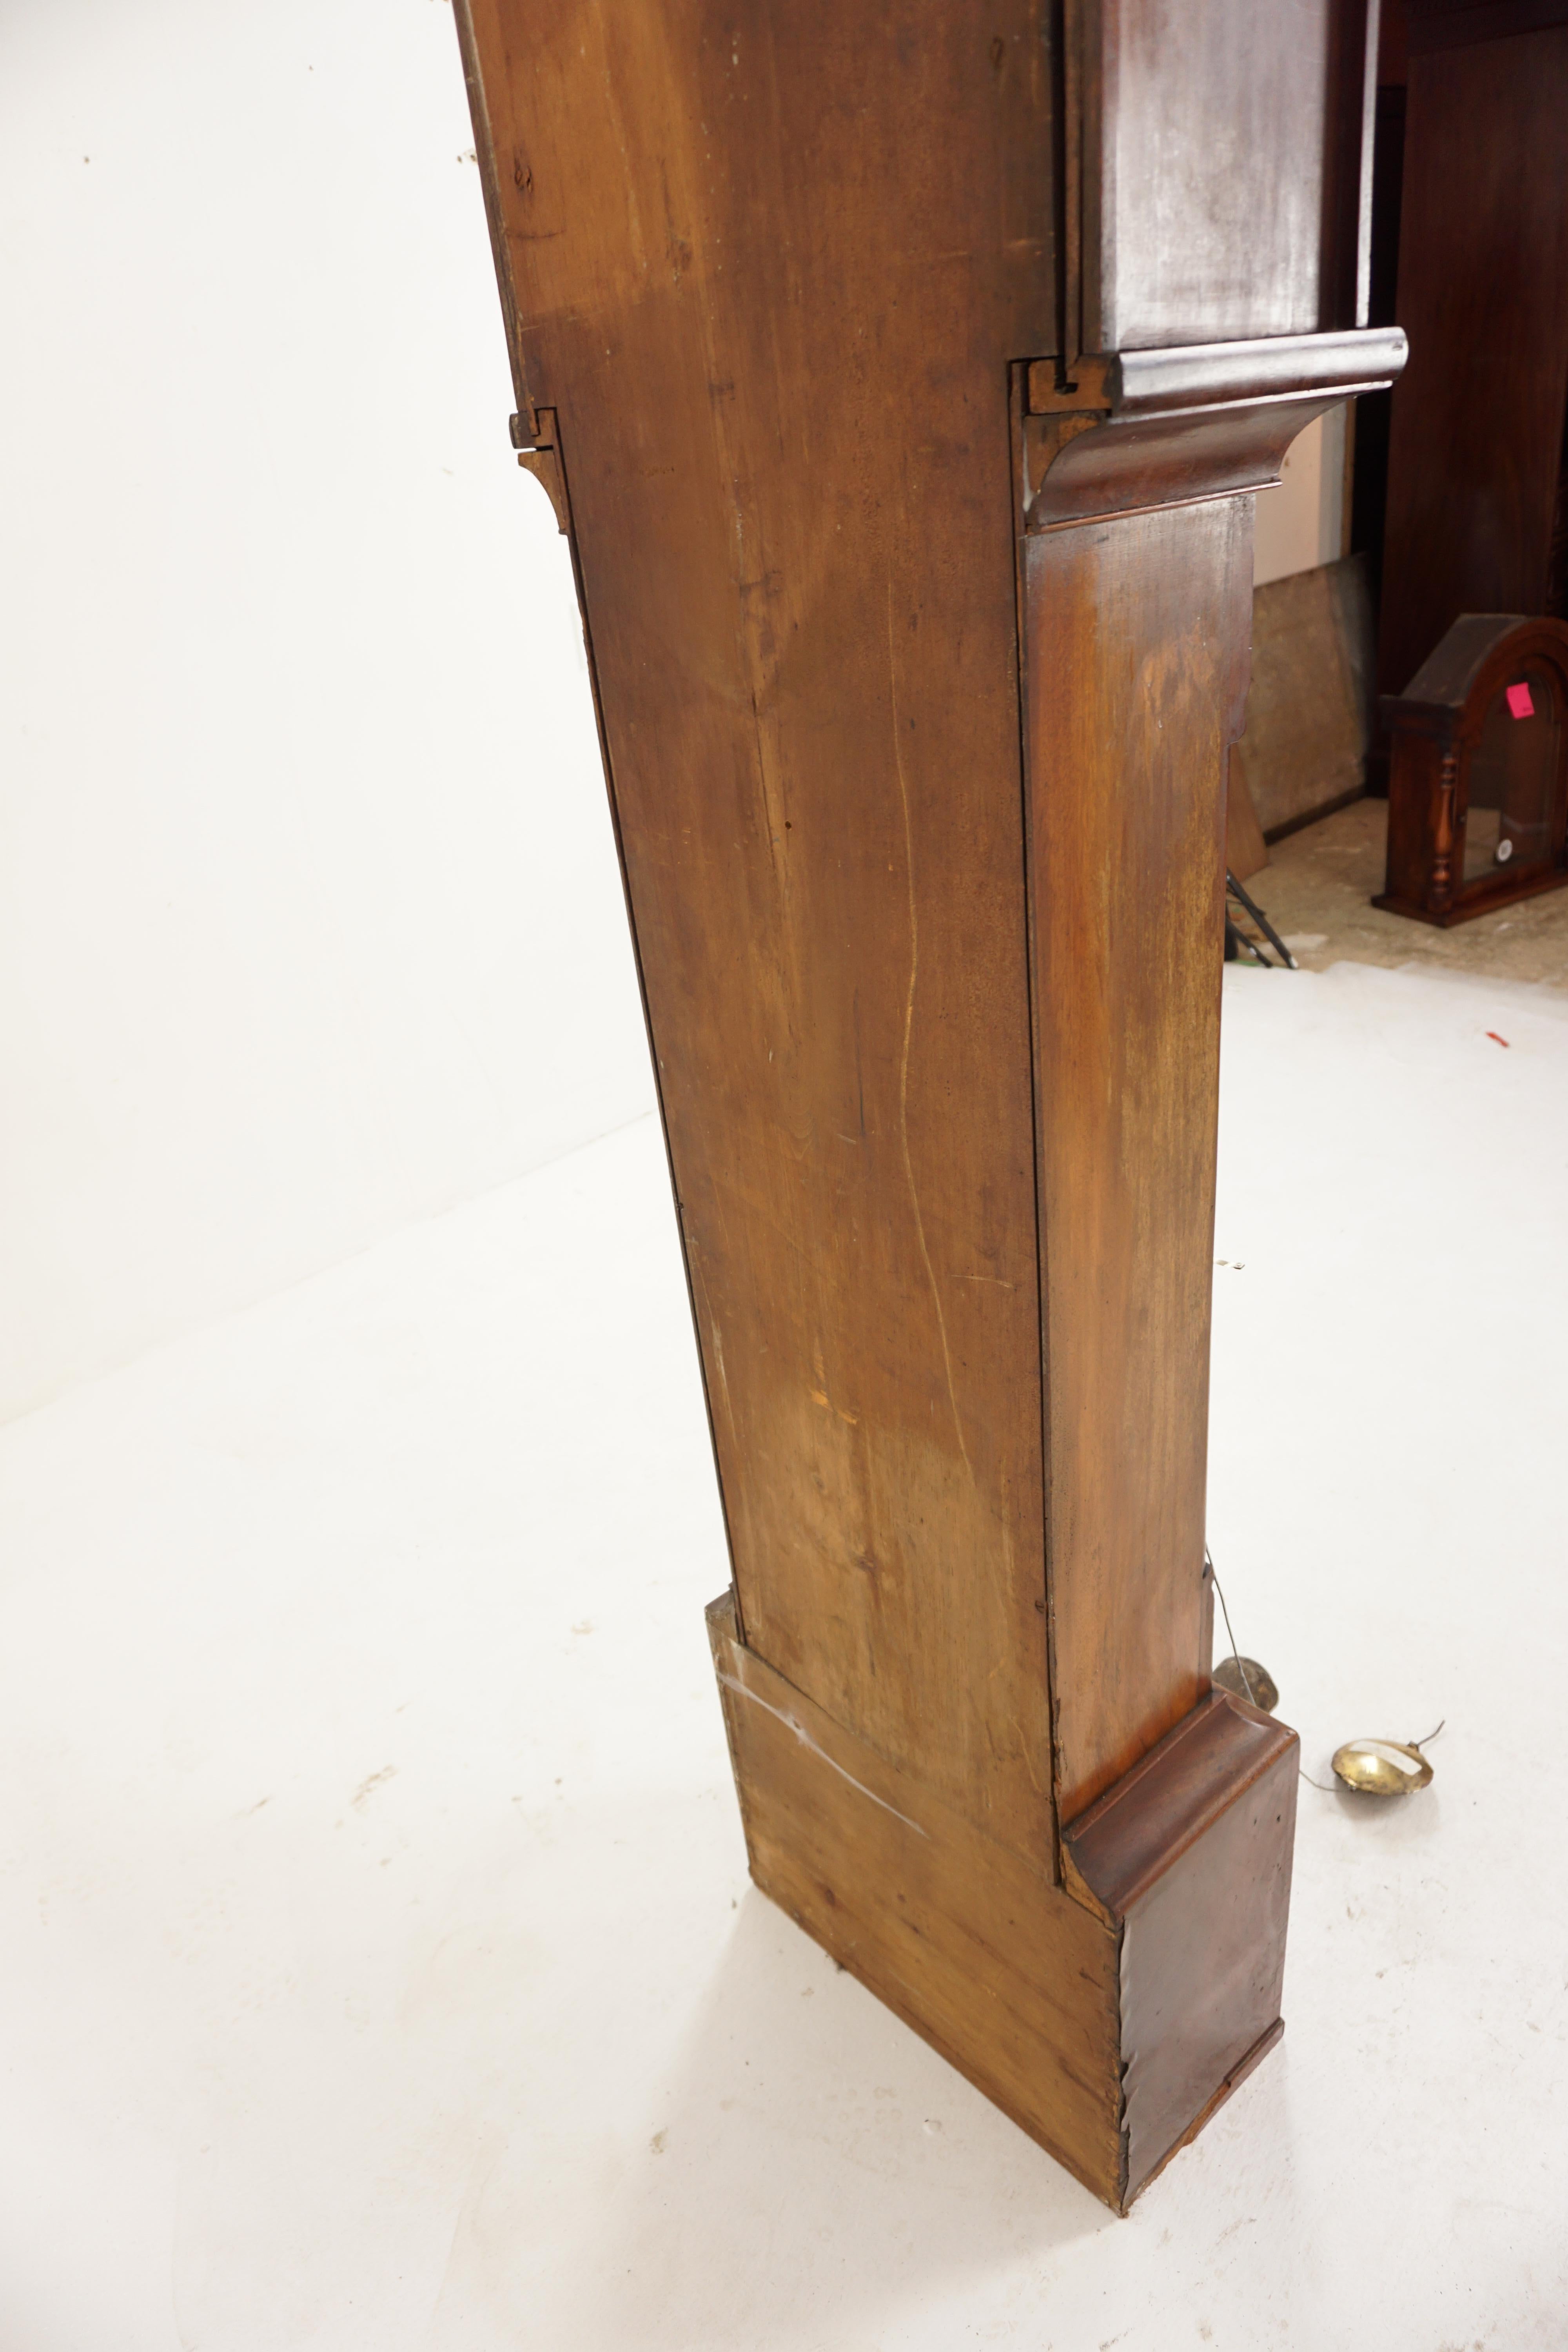 Vic. Grandfather Long Case Clock by Jas Huston of Johnstone, Scotland 1870 H182 9